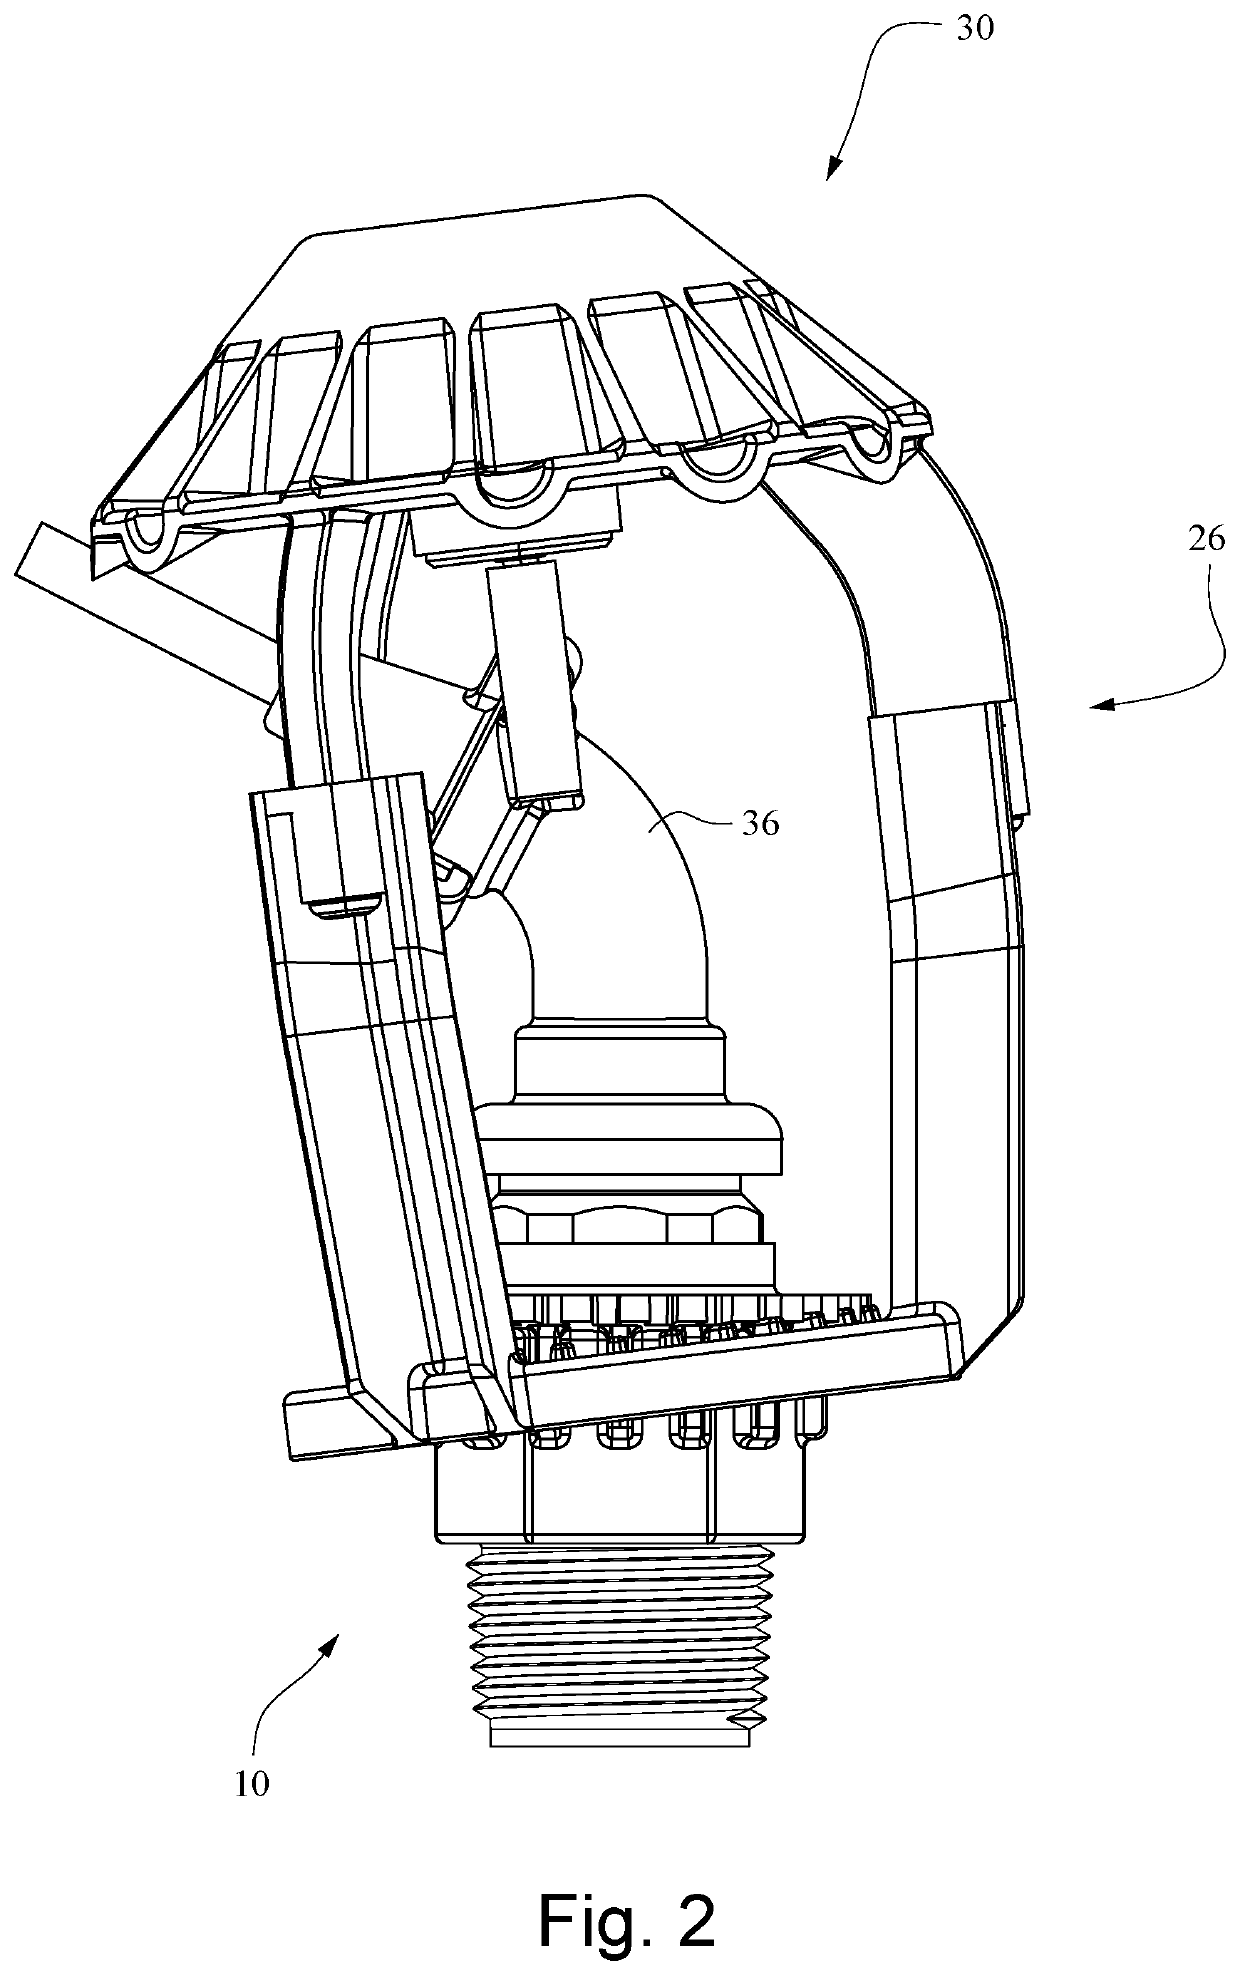 Rotary nozzle sprinkler with orbital diffuser